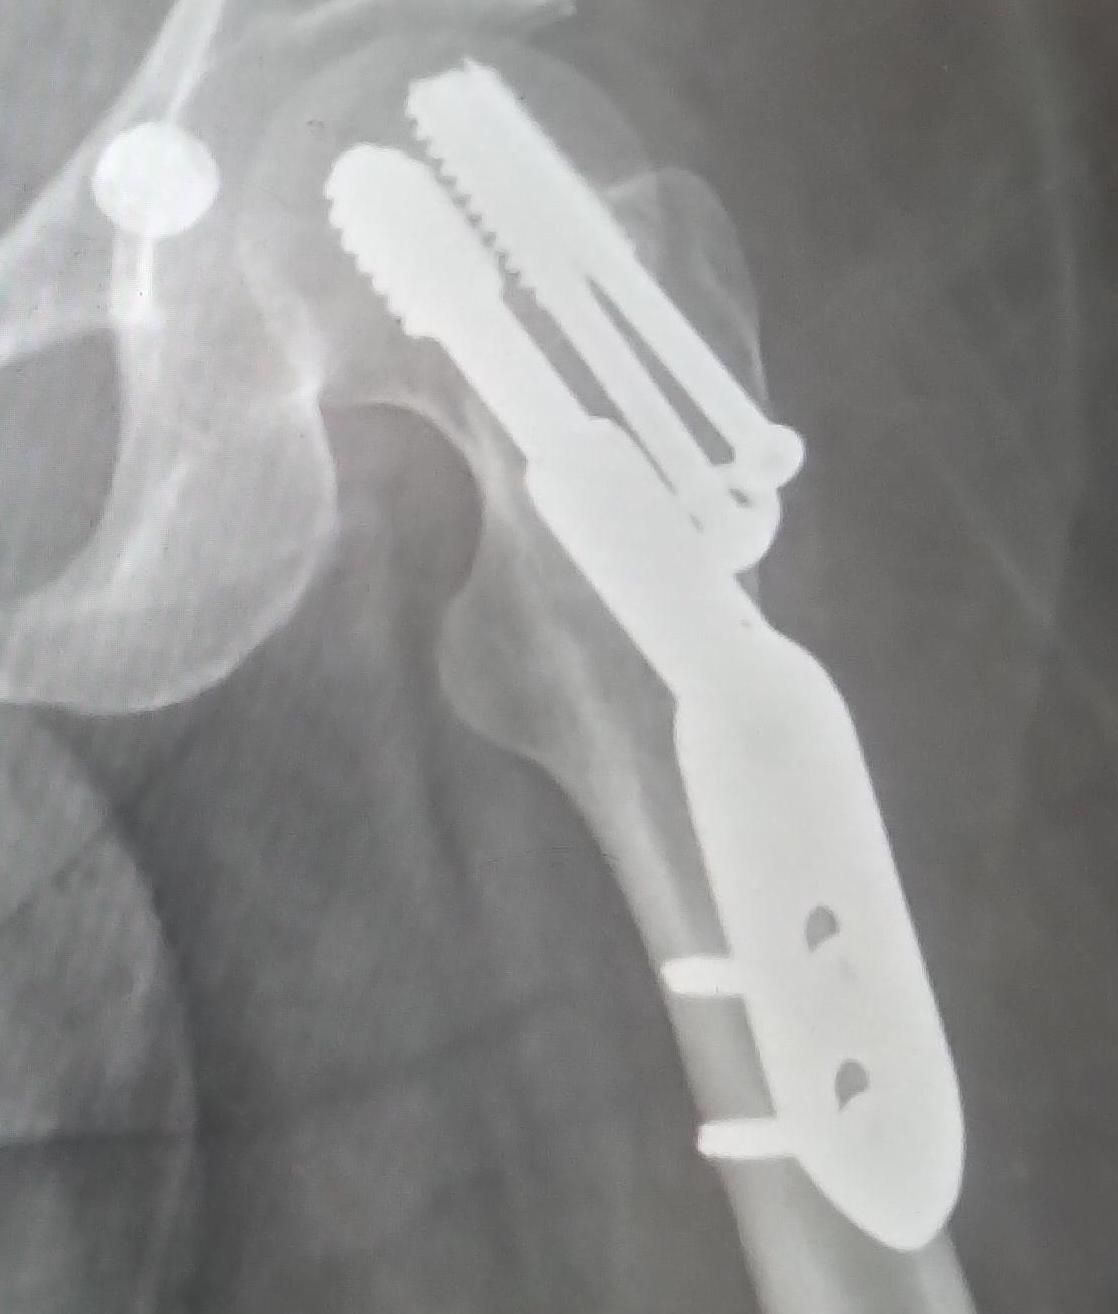 X-ray of the hip: metal is attached to the femur, two screws in a hinge alongside a longer piece that goes along the bone